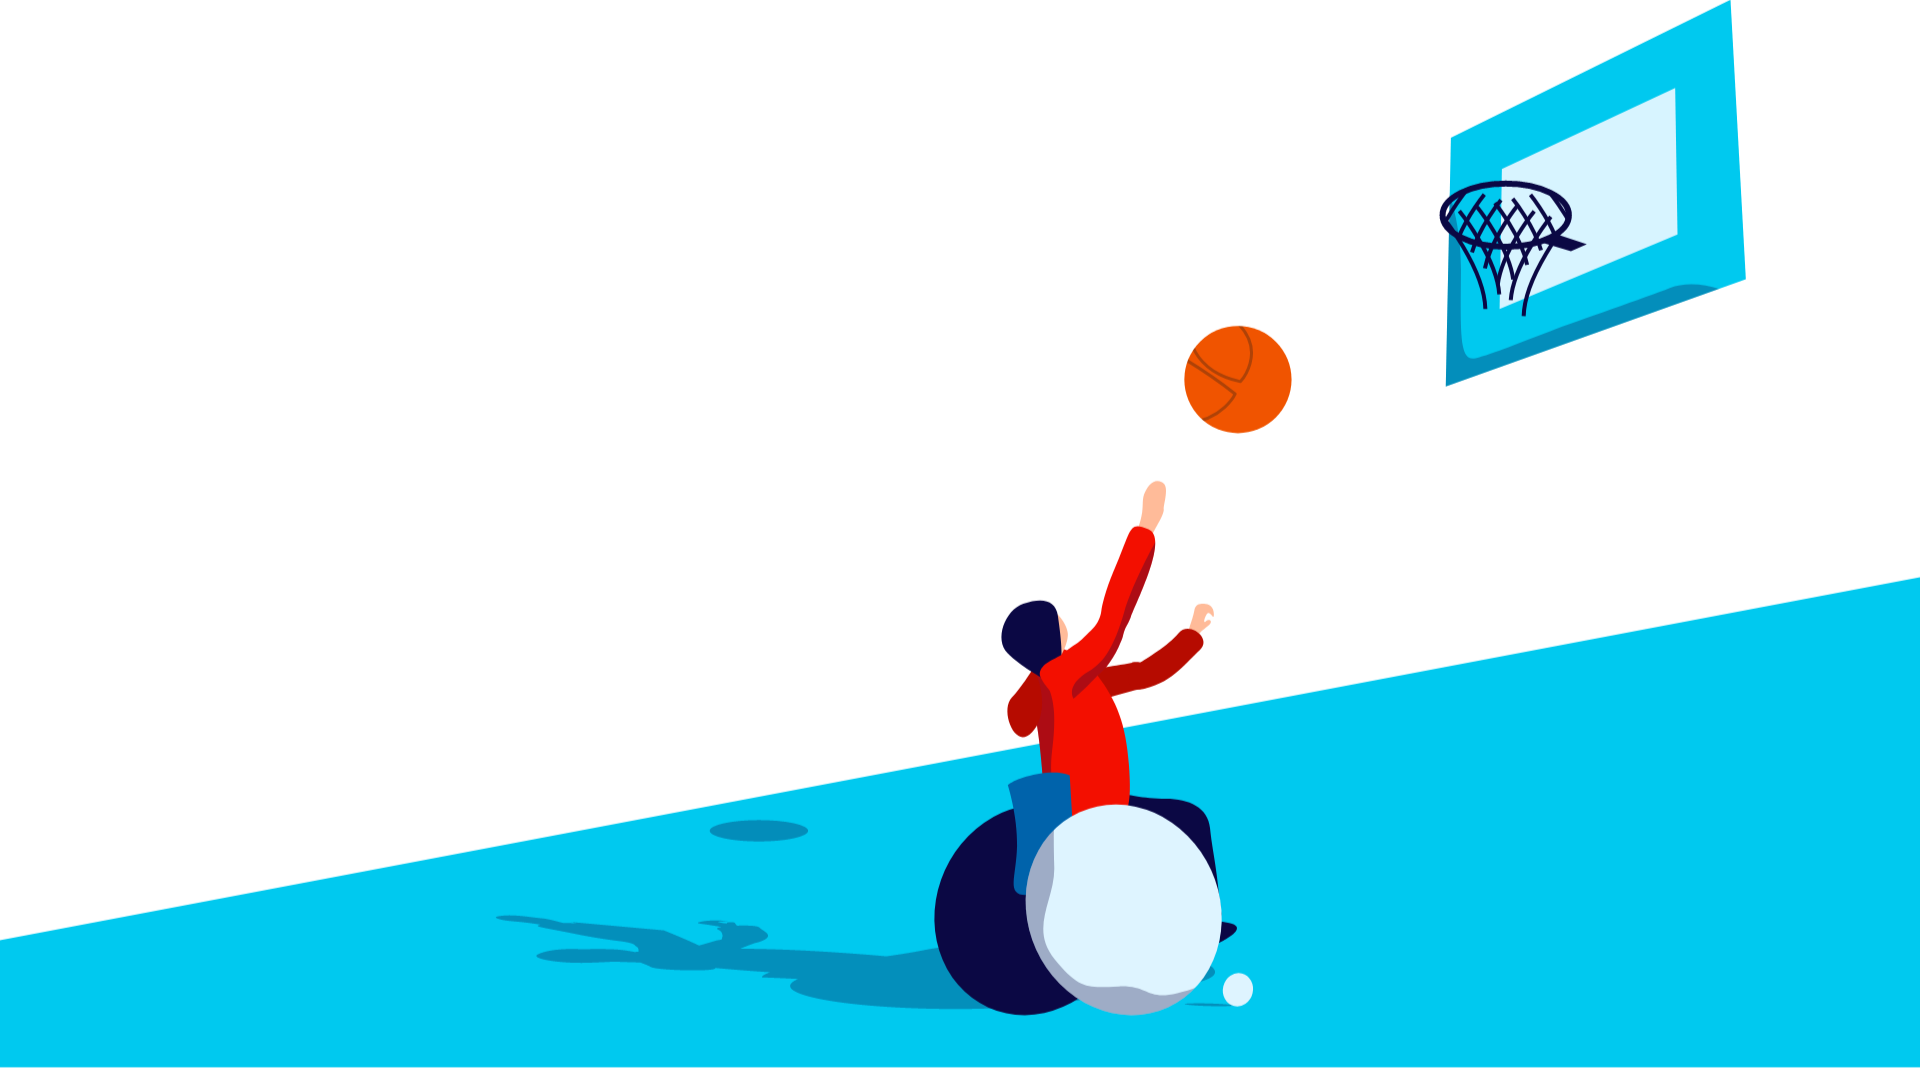 Illustration of disabled person playing basketball